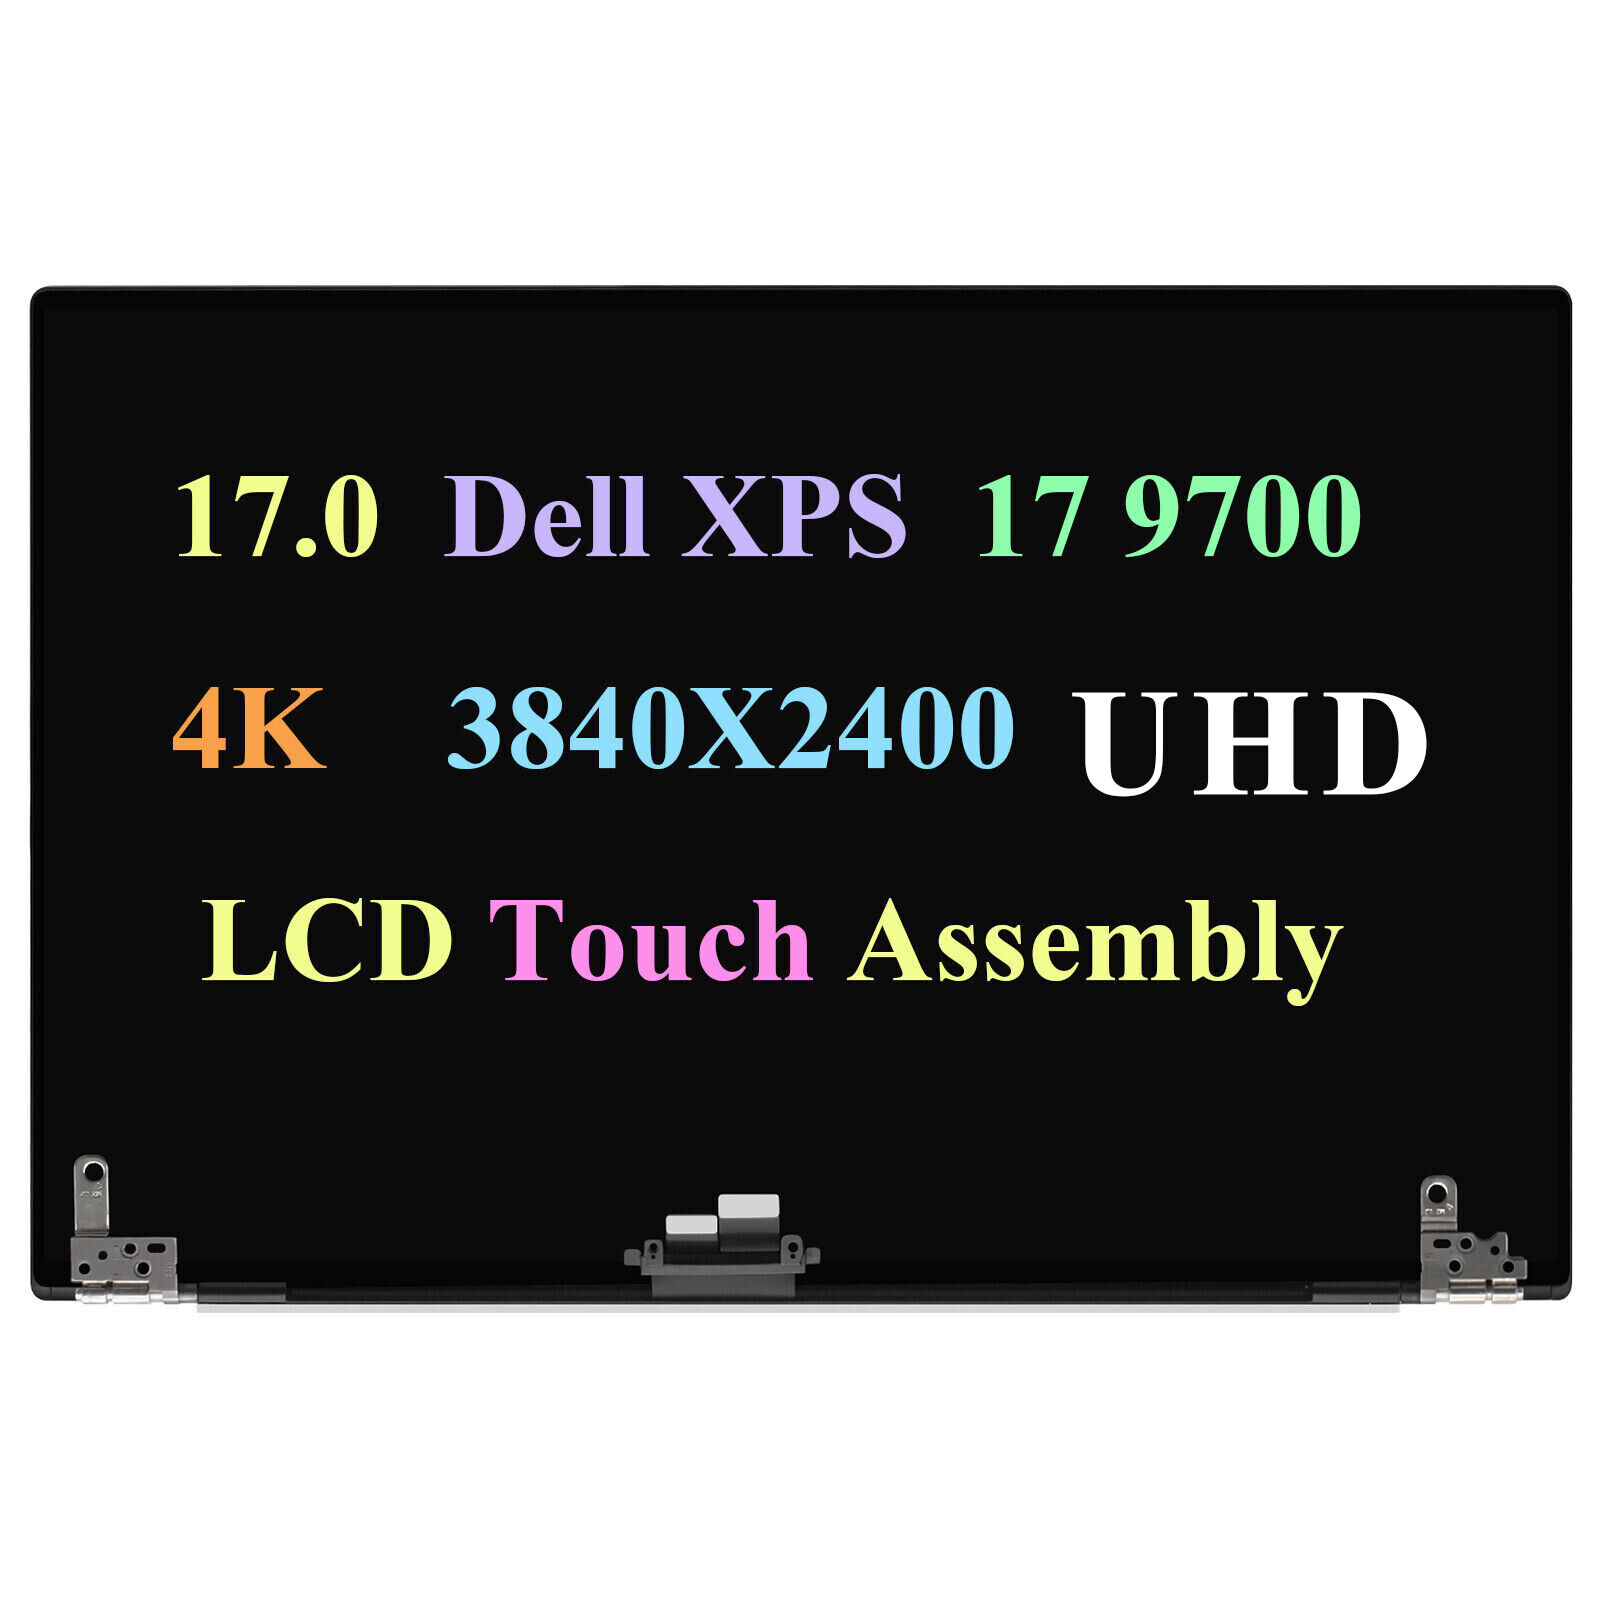 New Dell XPS 9700 / Precision 5750 4K UHD+ Touchscreen LCD Assembly TVD8G 0TVD8G